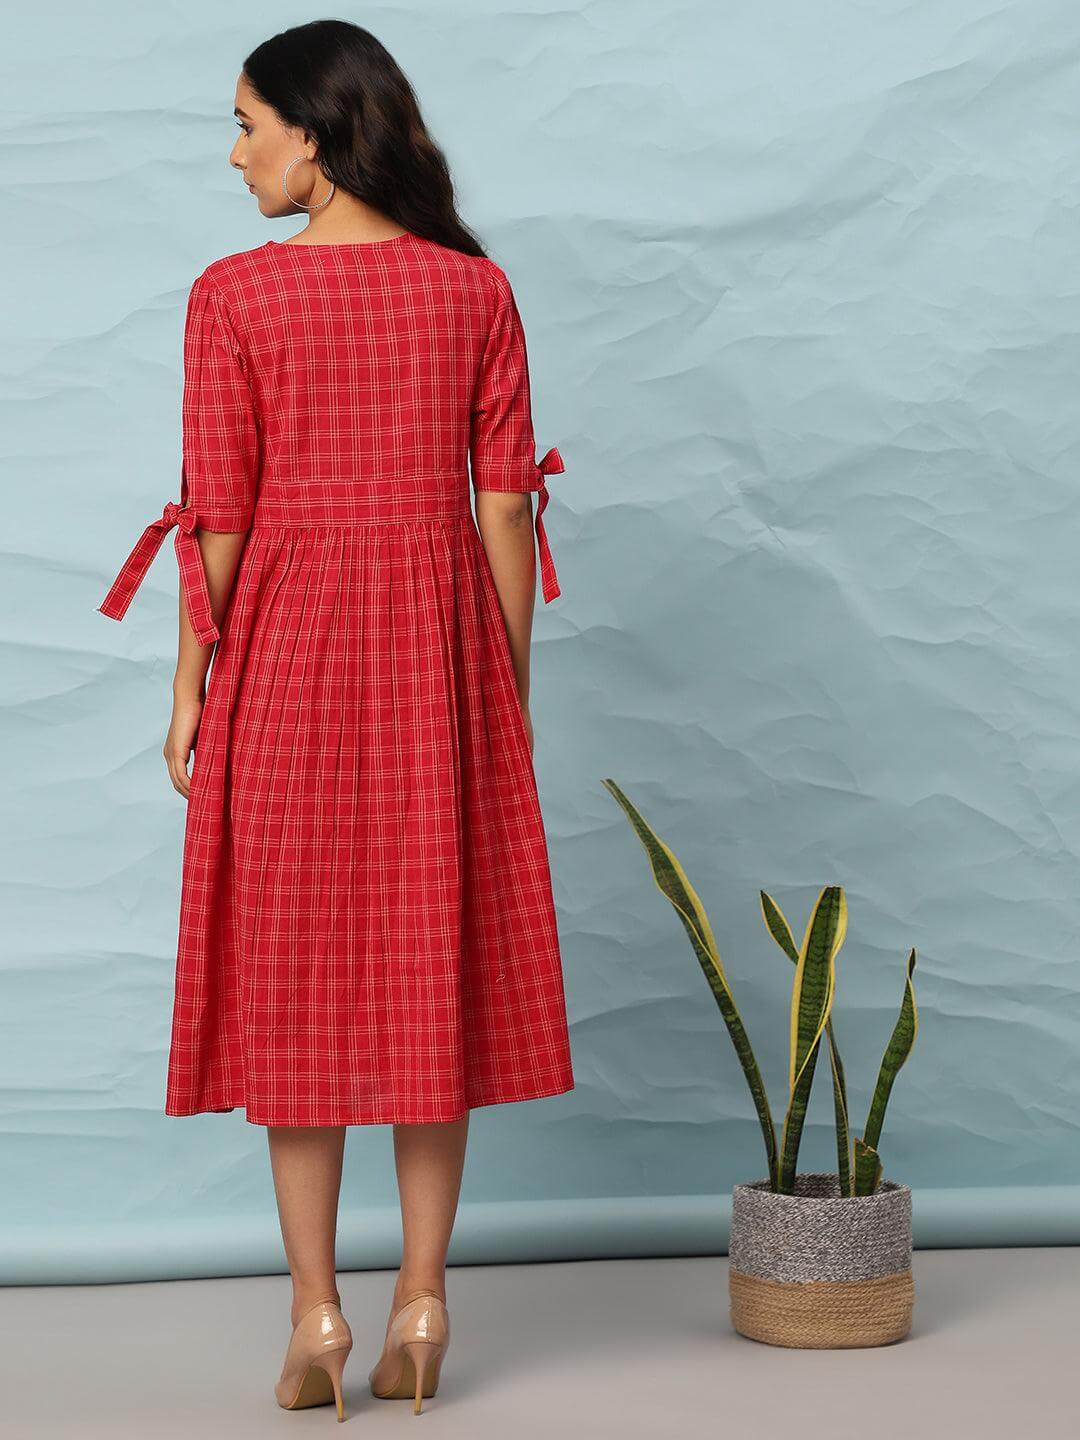 Red Cotton Checkered Flared Western Dress